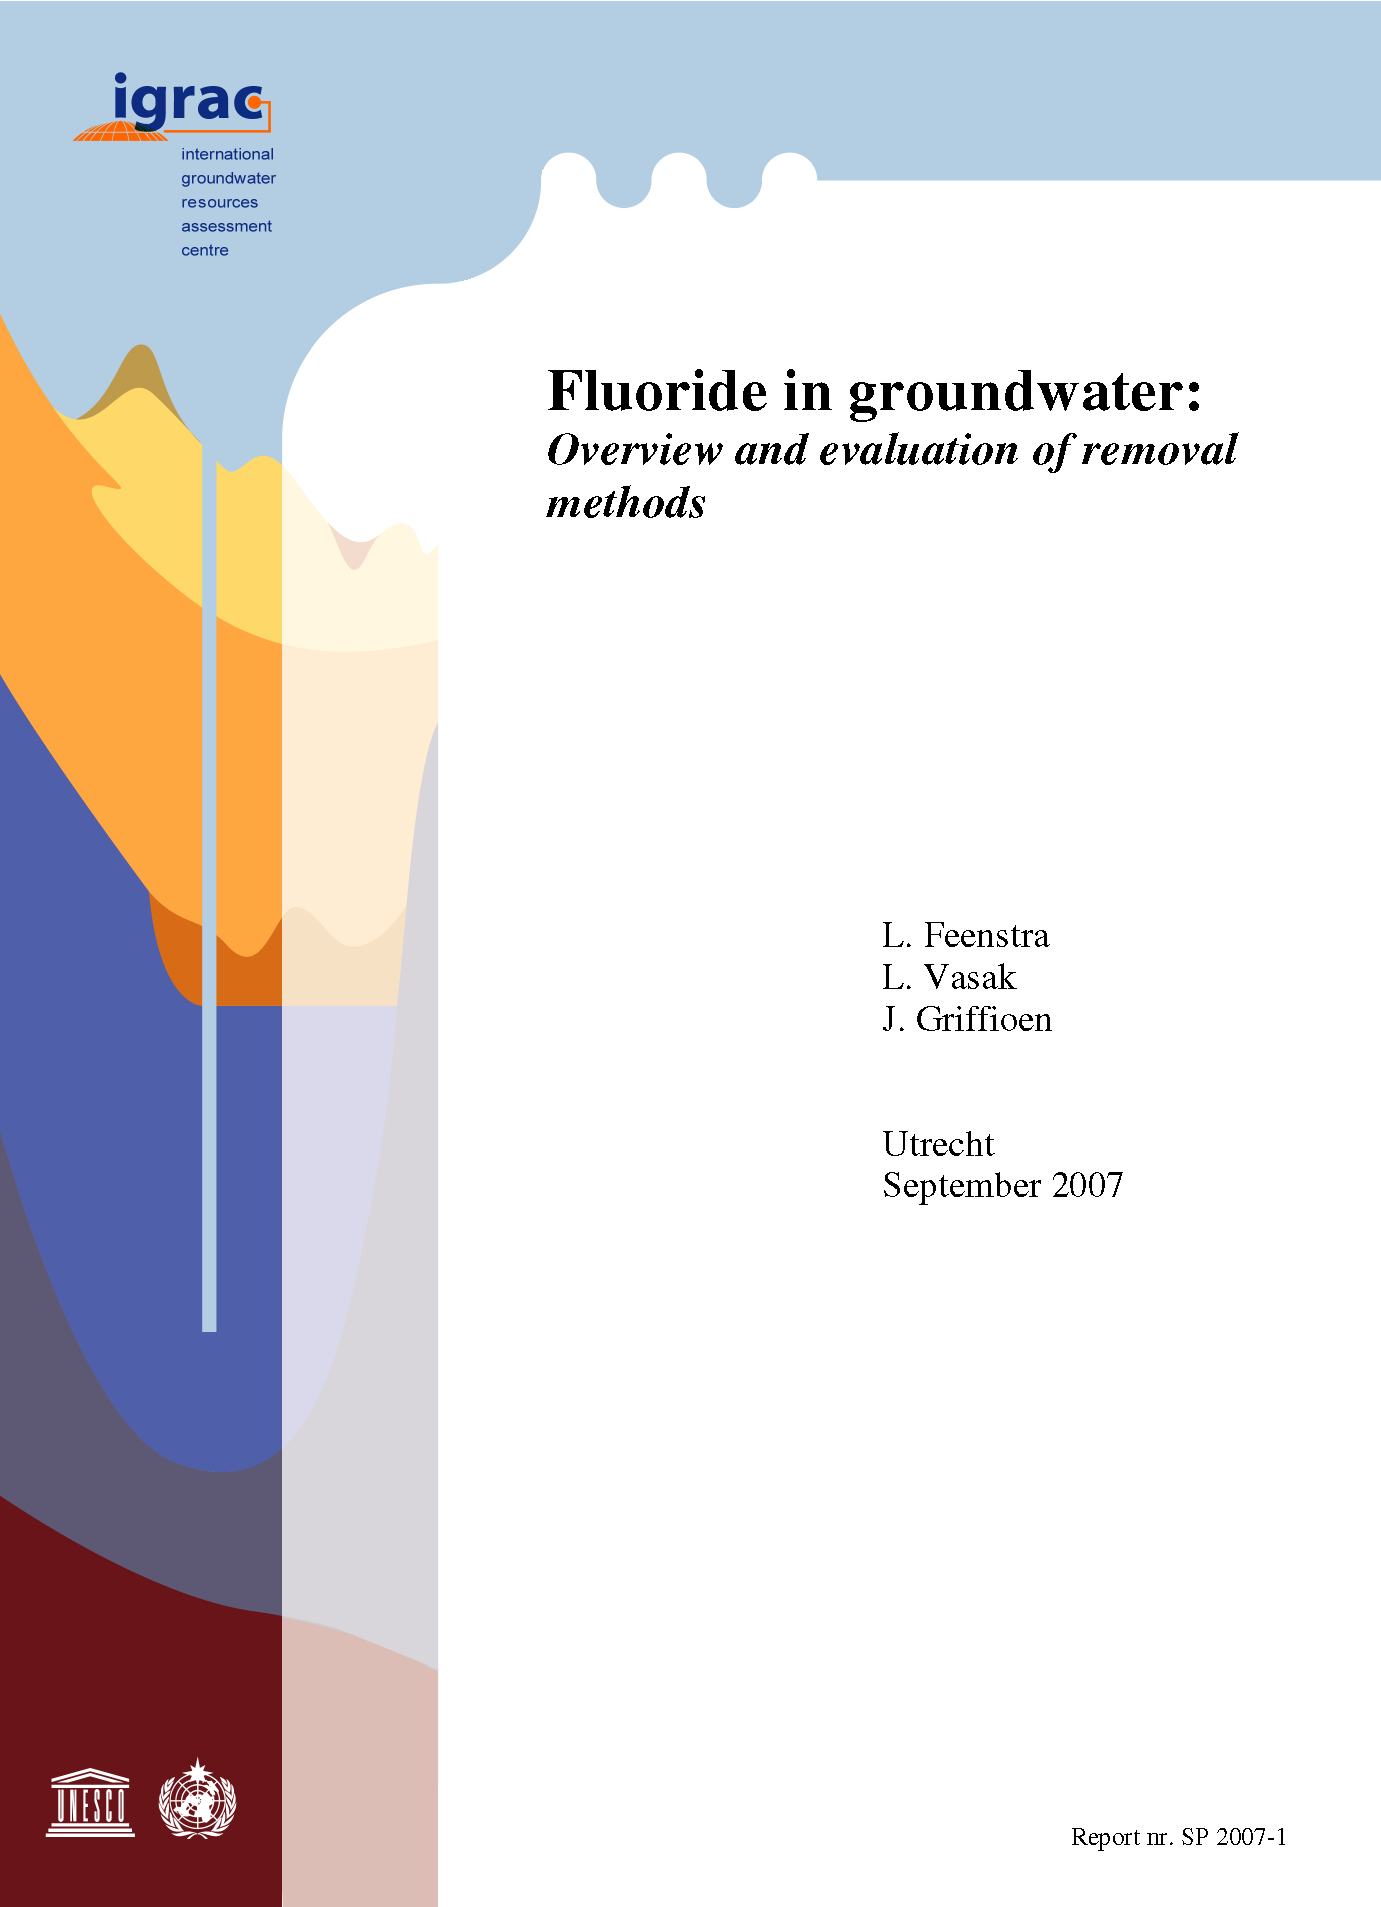 Cover-page for Flouride in Groundwater: Overview and Evaluation of Removal Methods